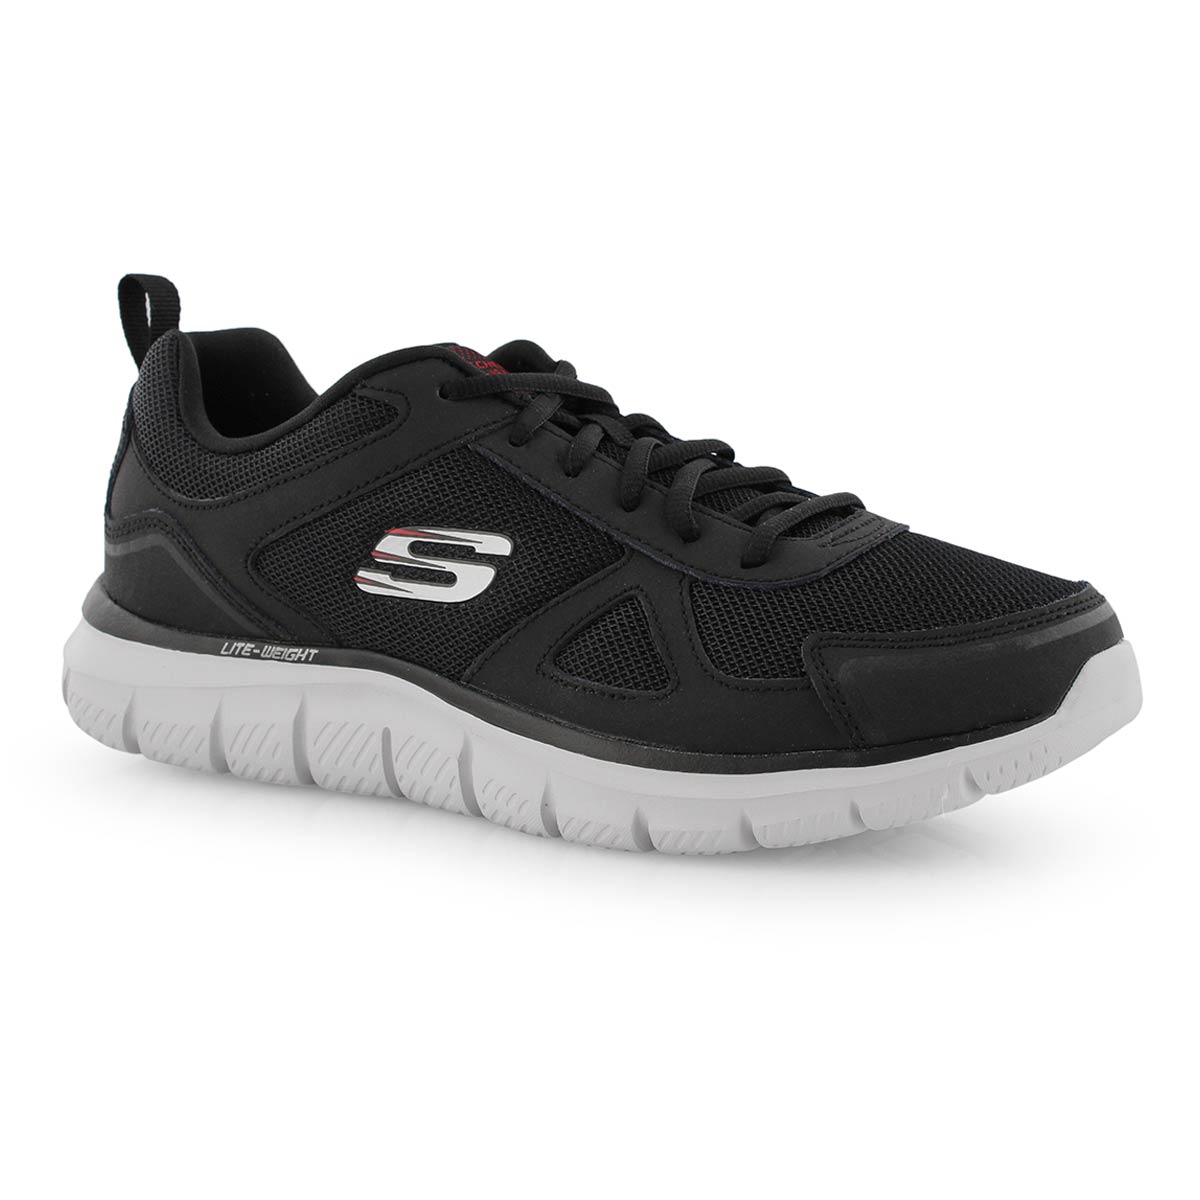 skechers lite weight review